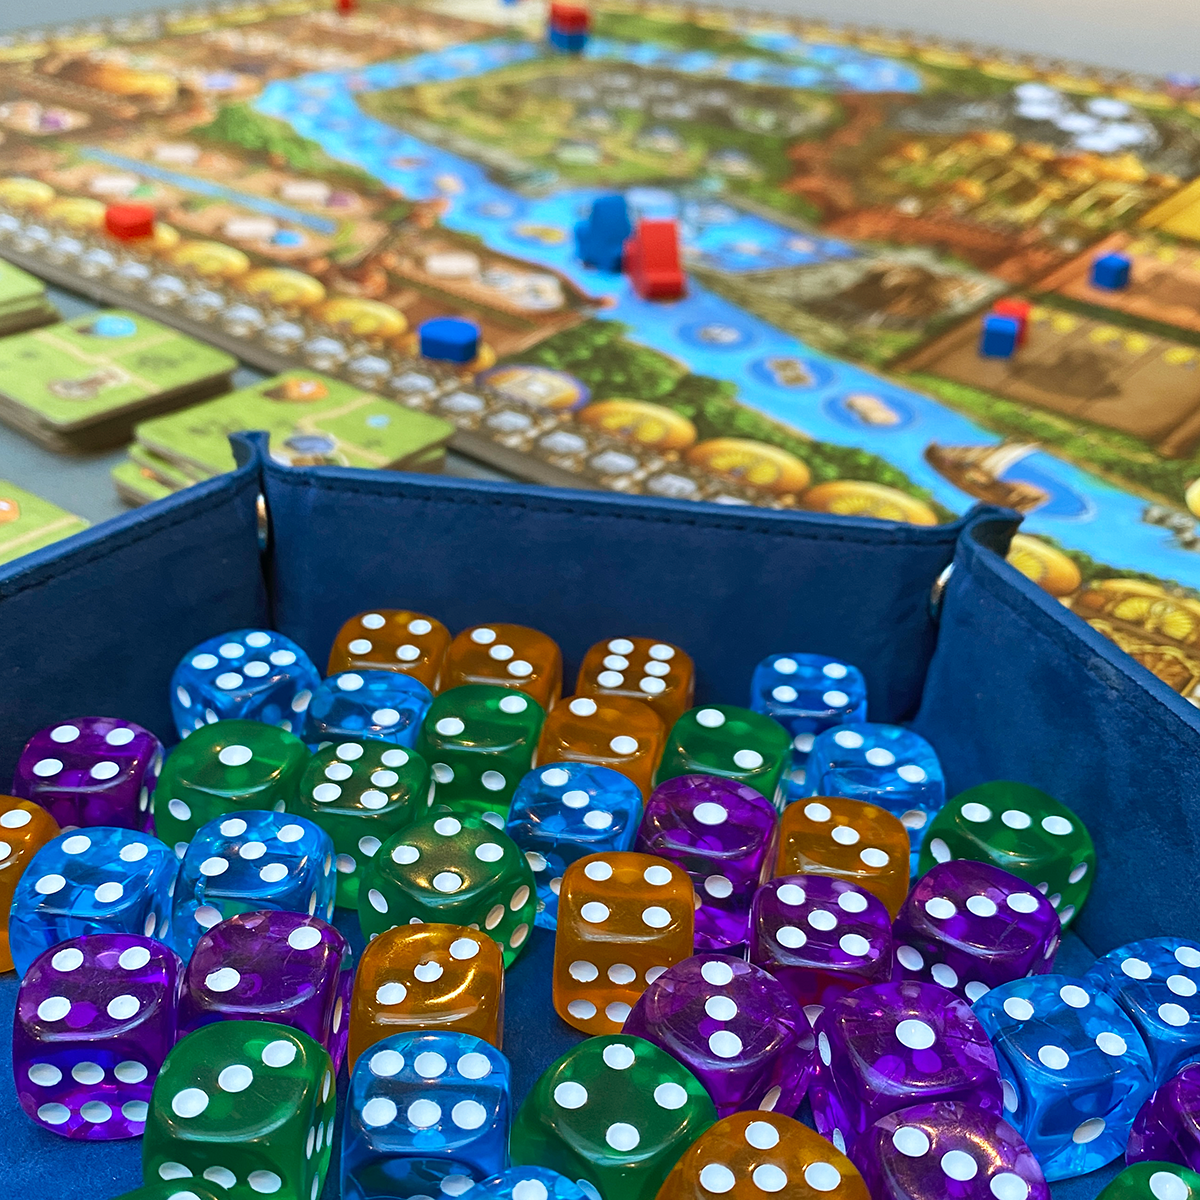 Rajas of the Ganges Board Game Review Dice in tray